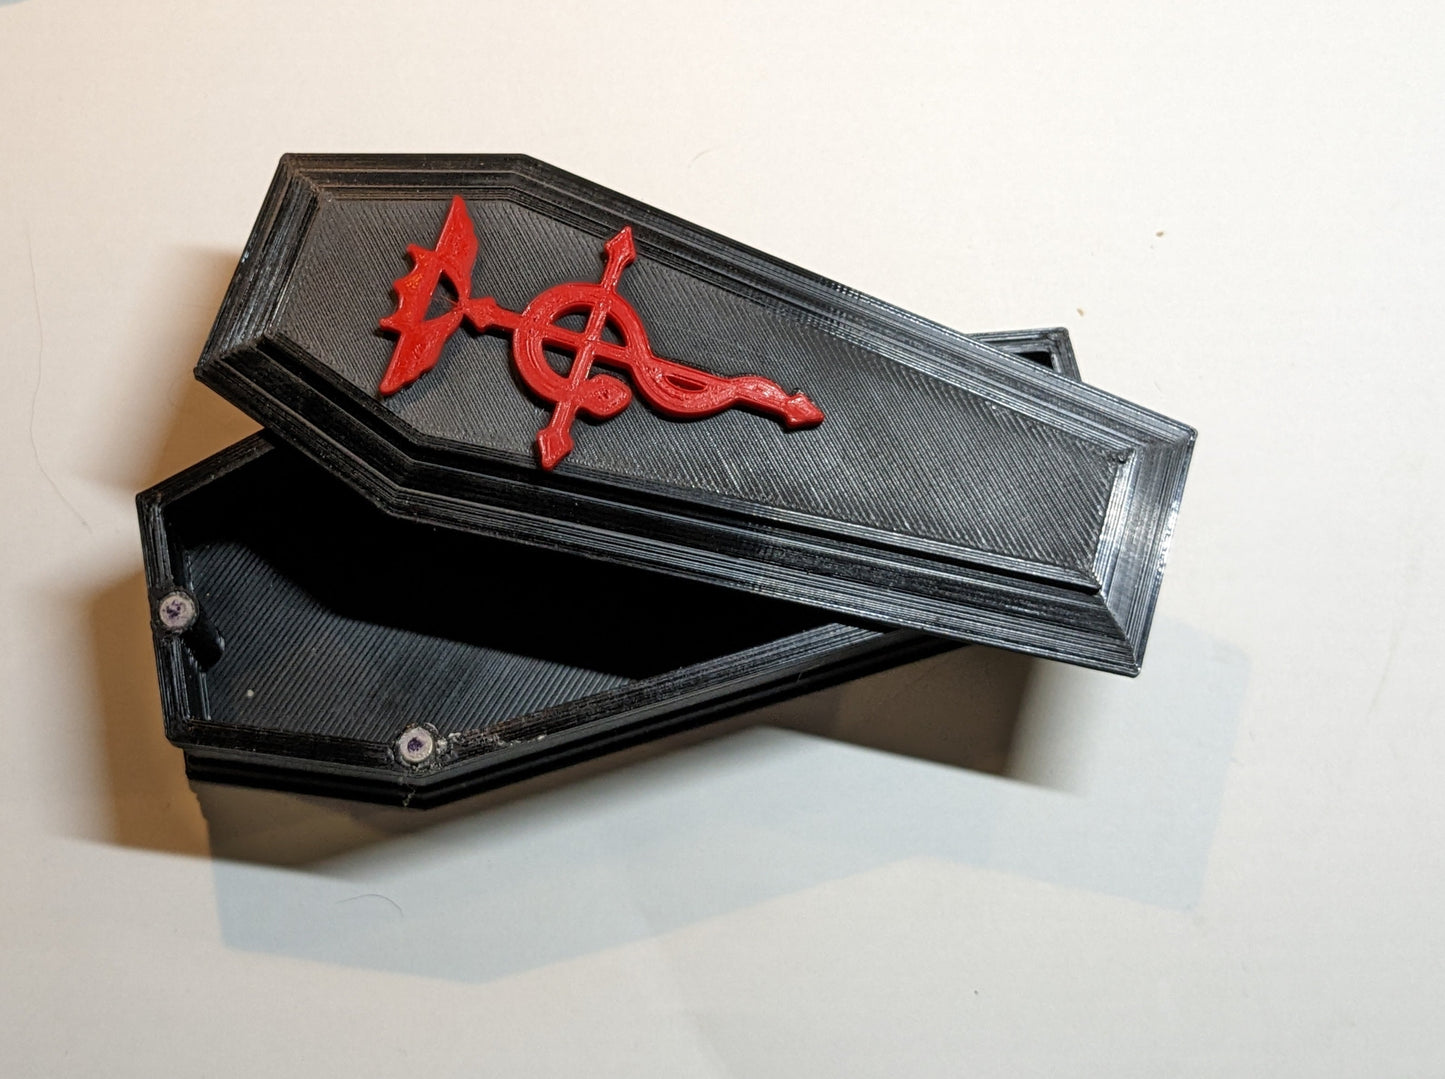 3D printed coffin shaped dice/trinket box in black with a red alchemy symbol in the top.  The top is slightly askew to show the inside of the box